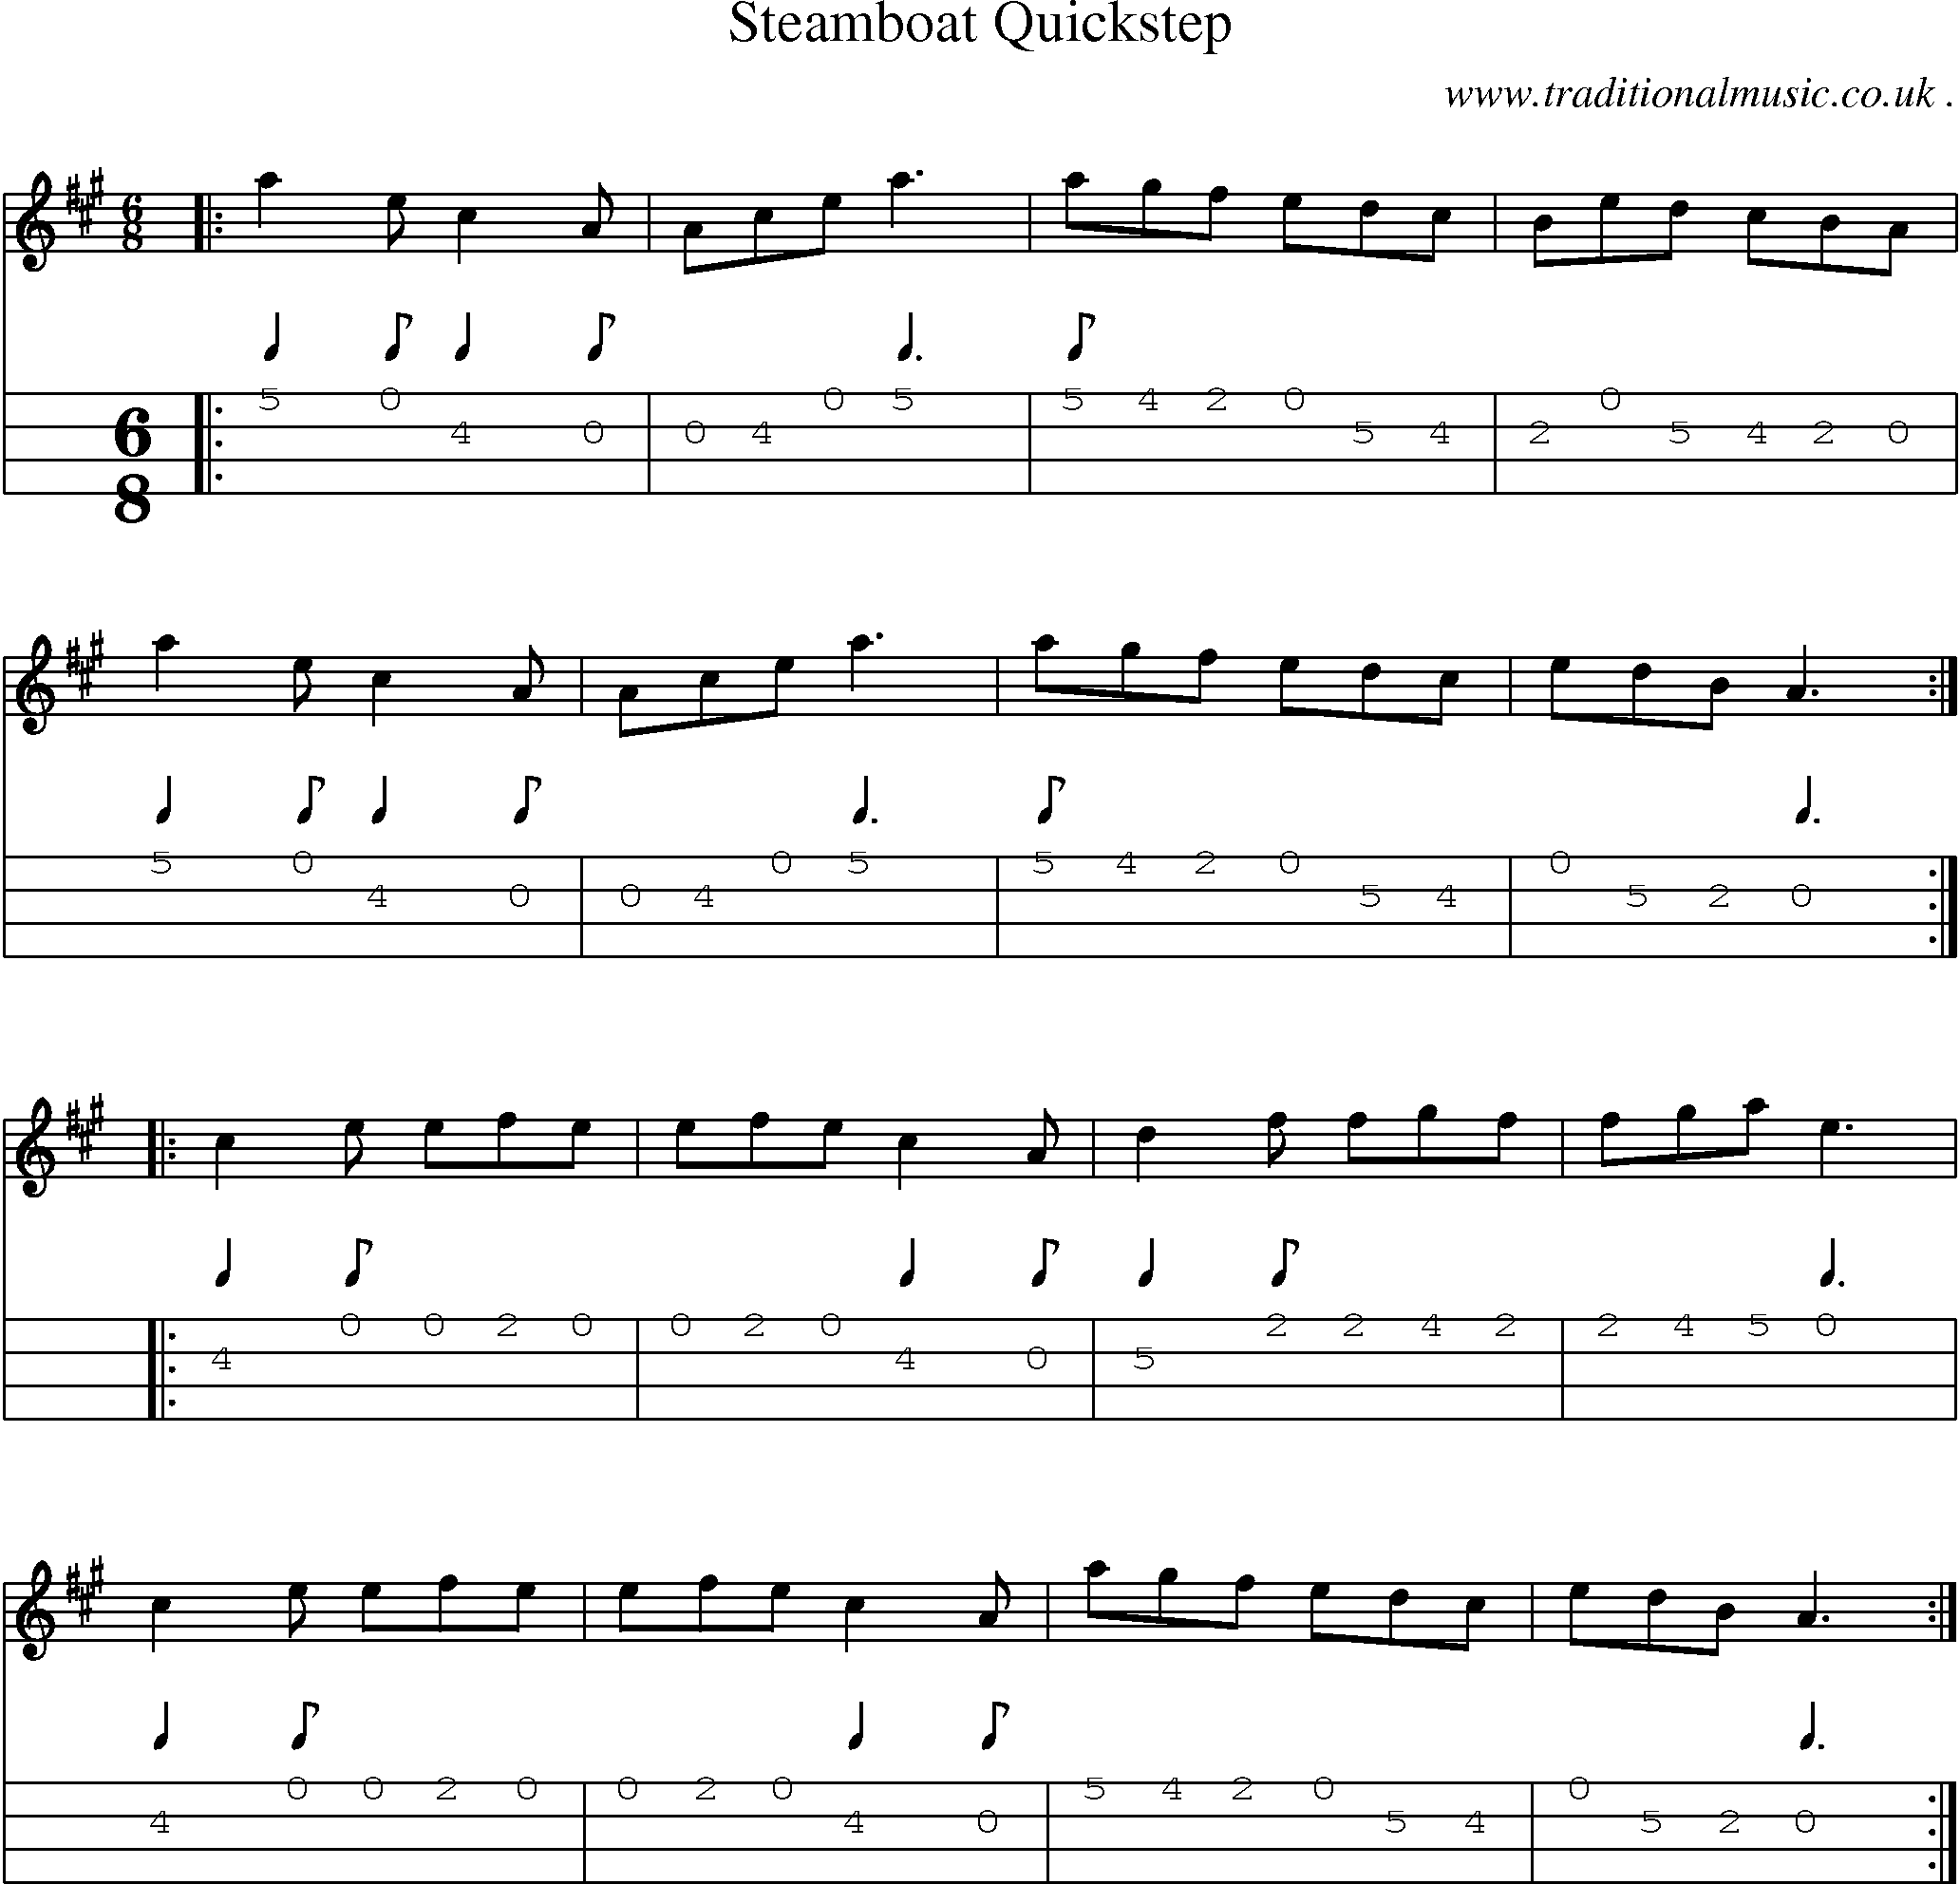 Music Score and Guitar Tabs for Steamboat Quickstep